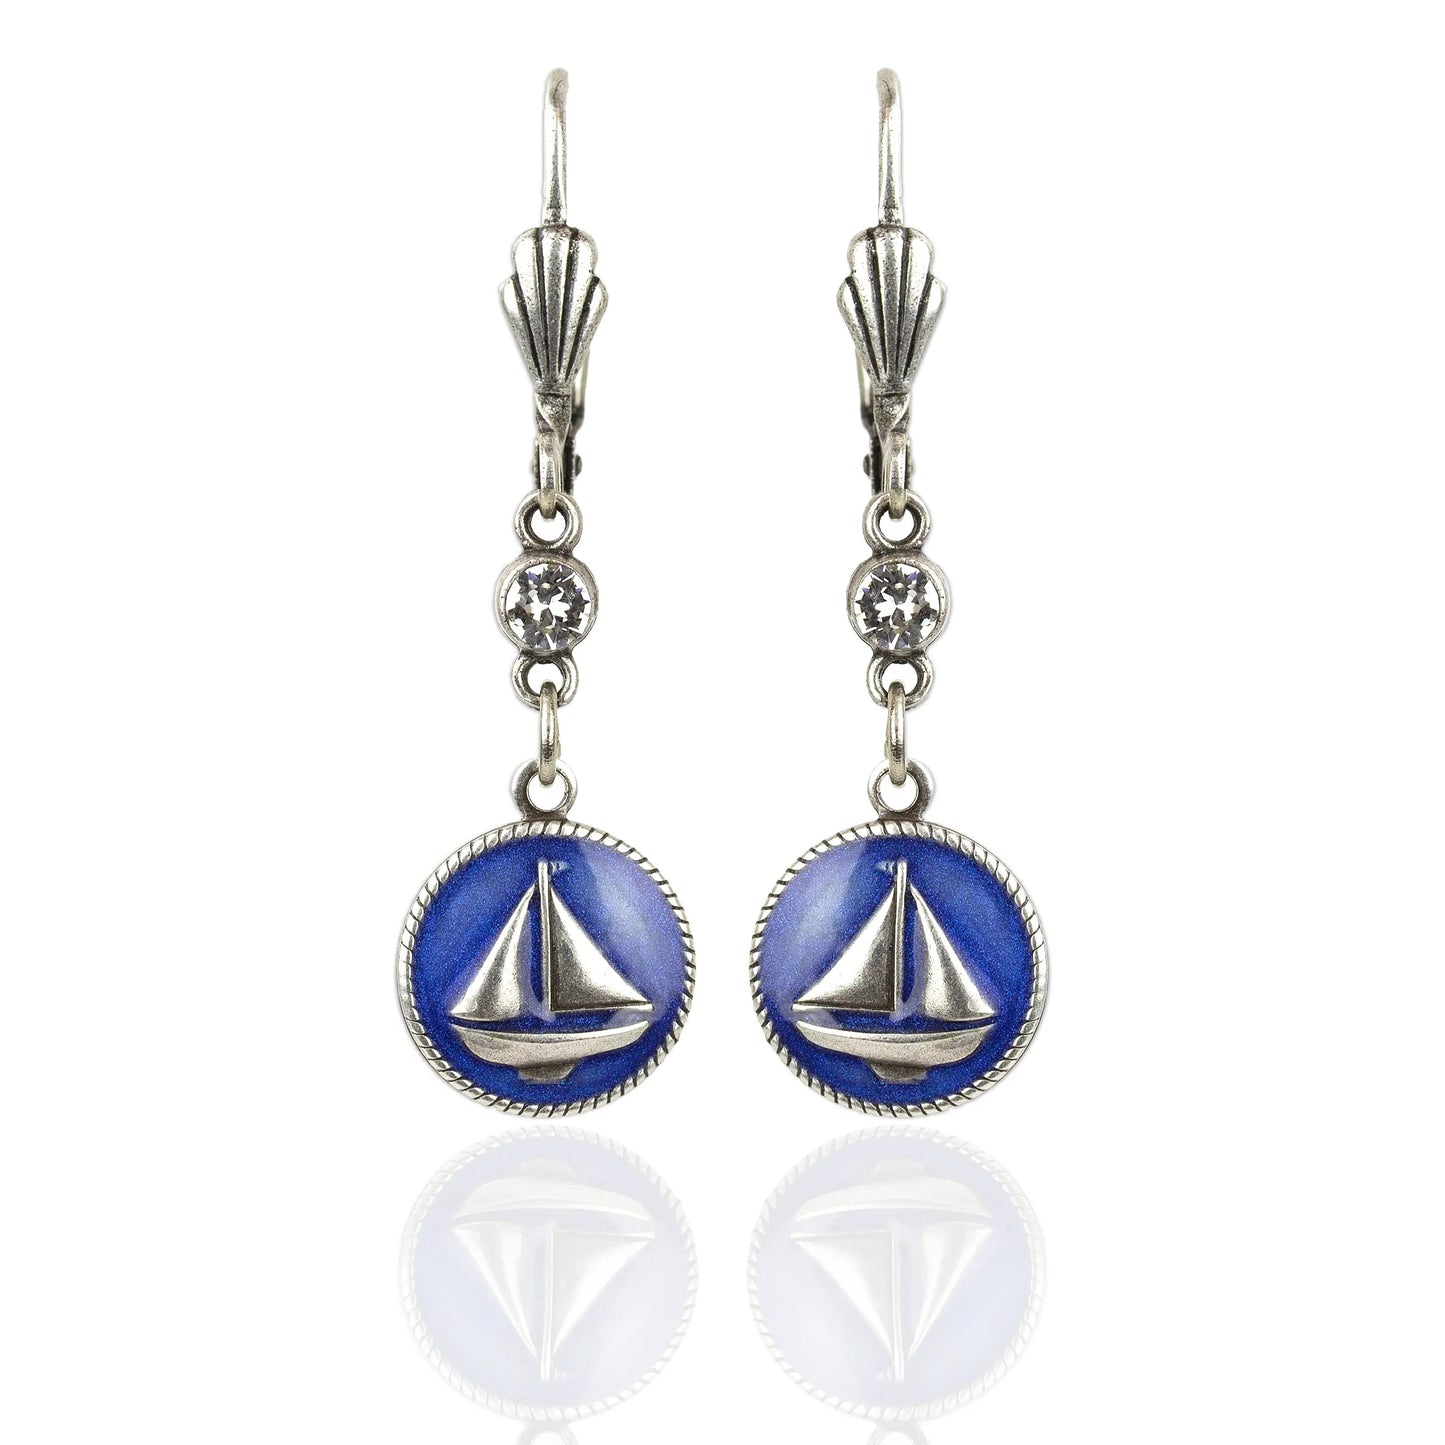 Smooth Sailing Earrings